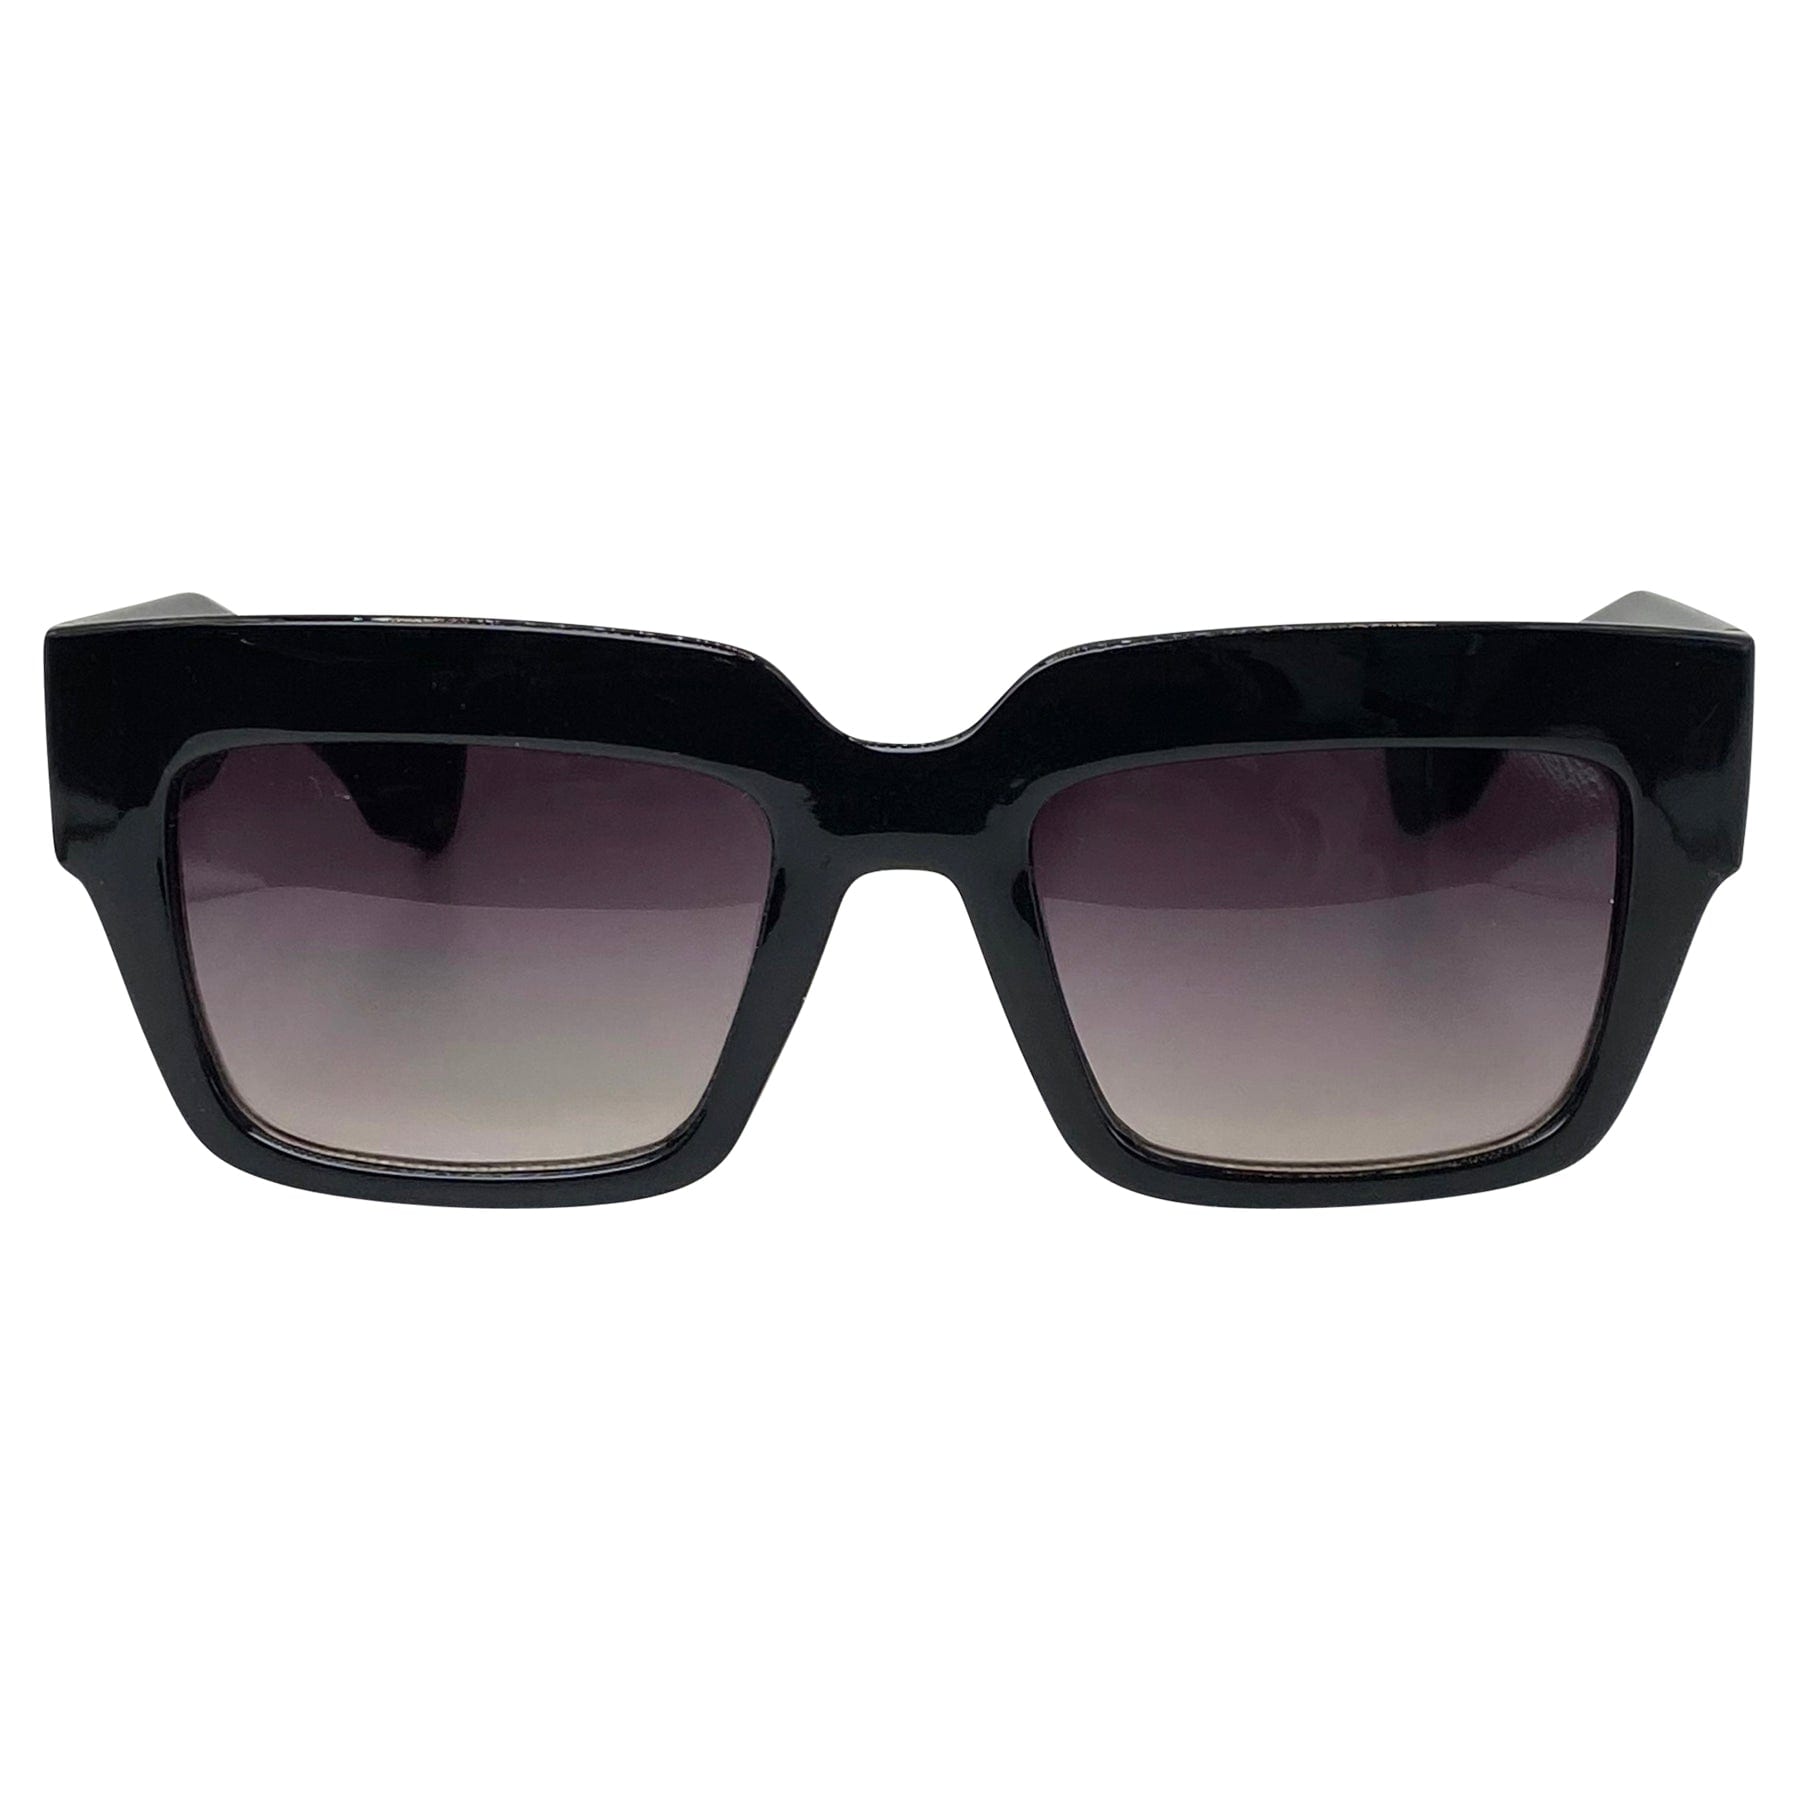 mod black vintage frames with a smoke tinted lens and gloss black finish on the frame